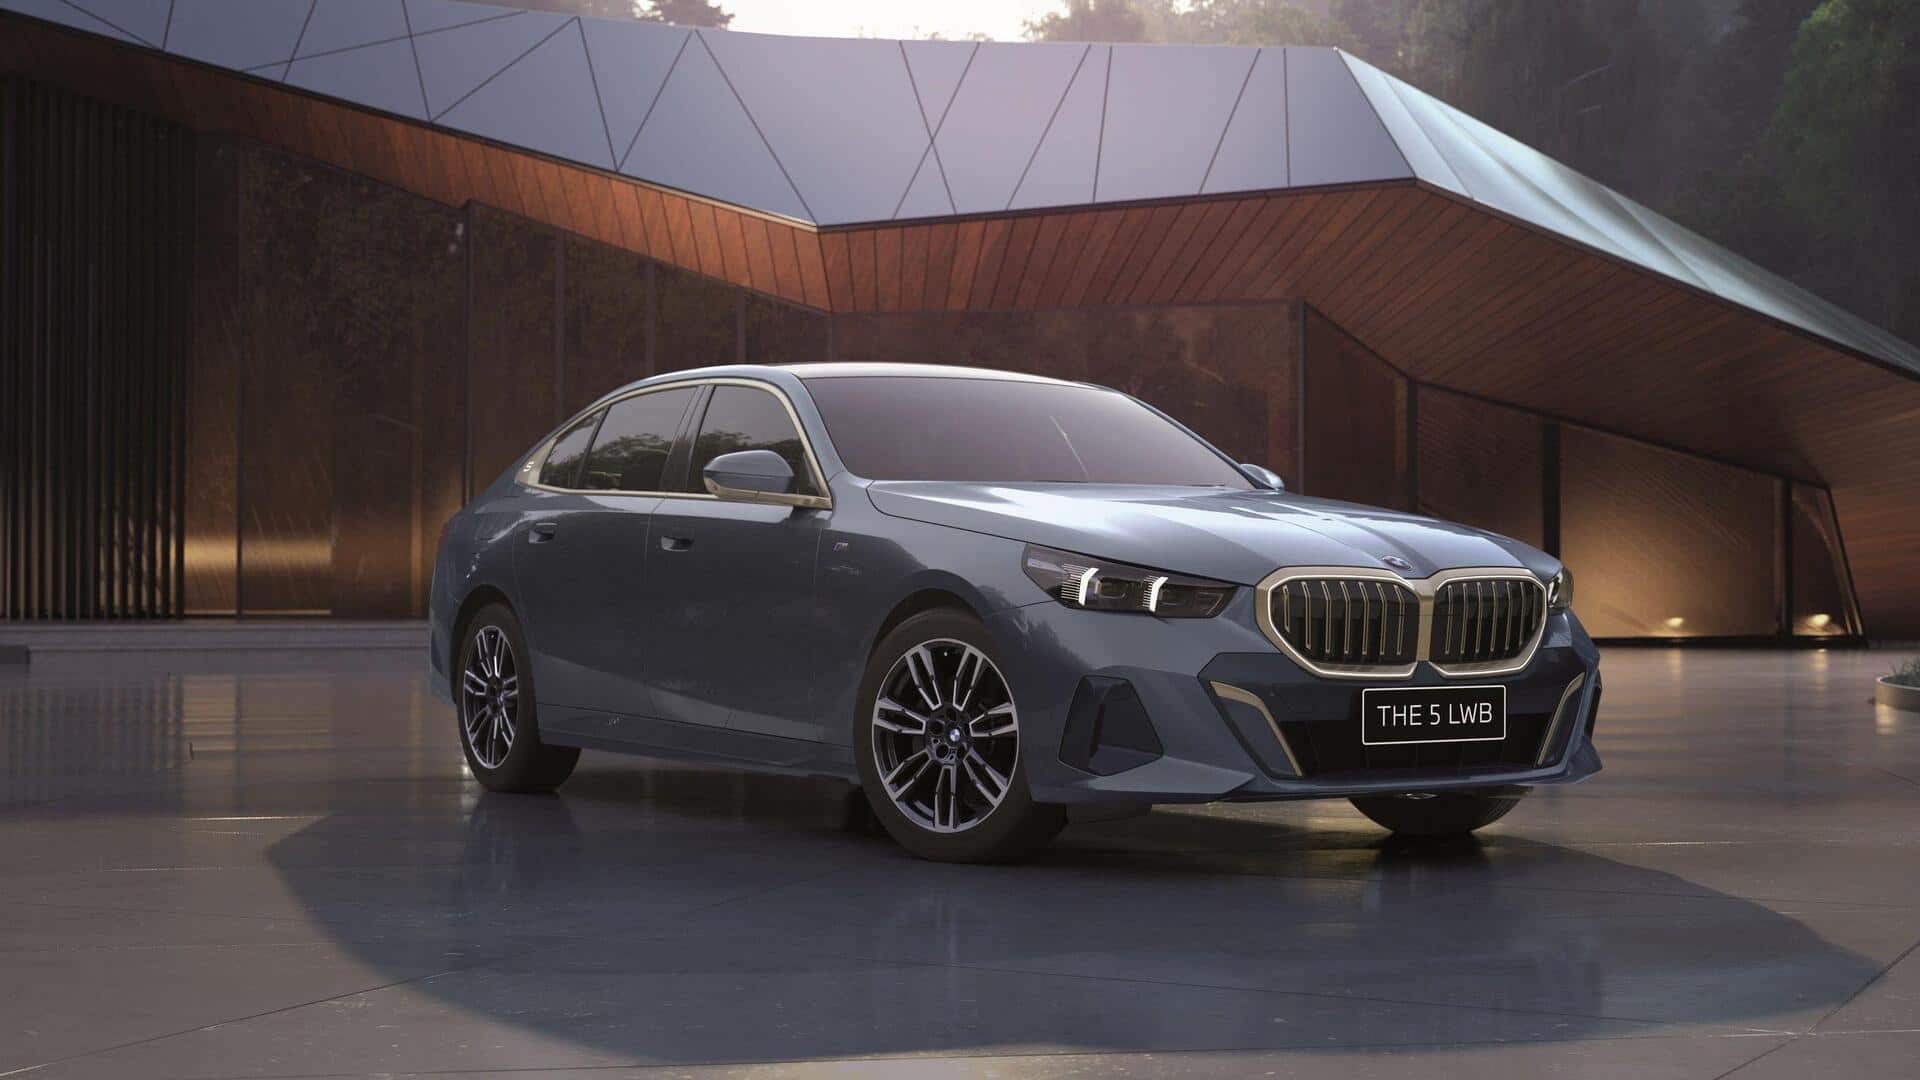 BMW opens pre-bookings for new 5 Series LWB in India